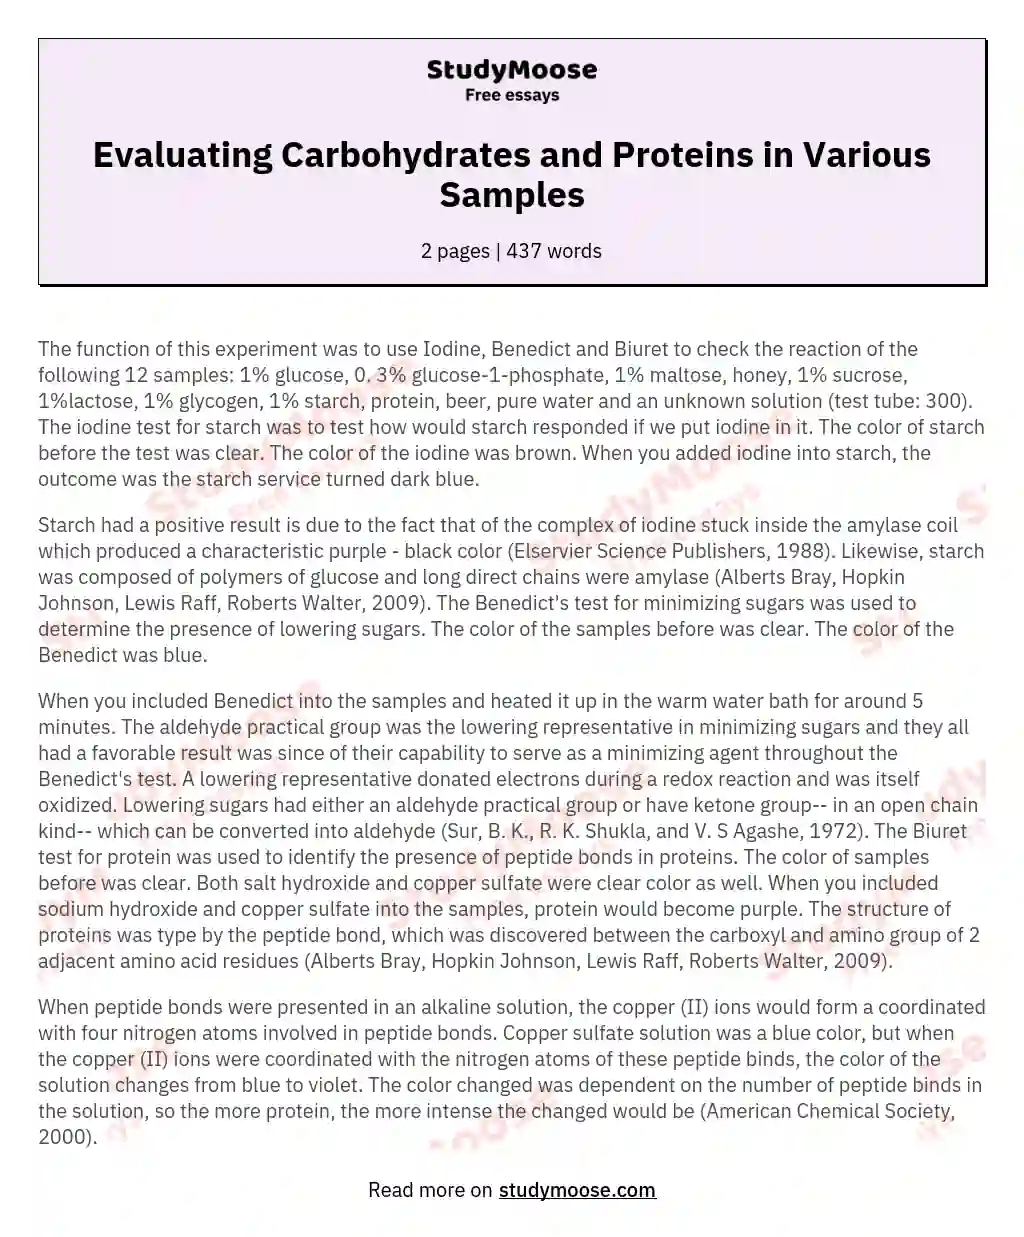 Evaluating Carbohydrates and Proteins in Various Samples essay